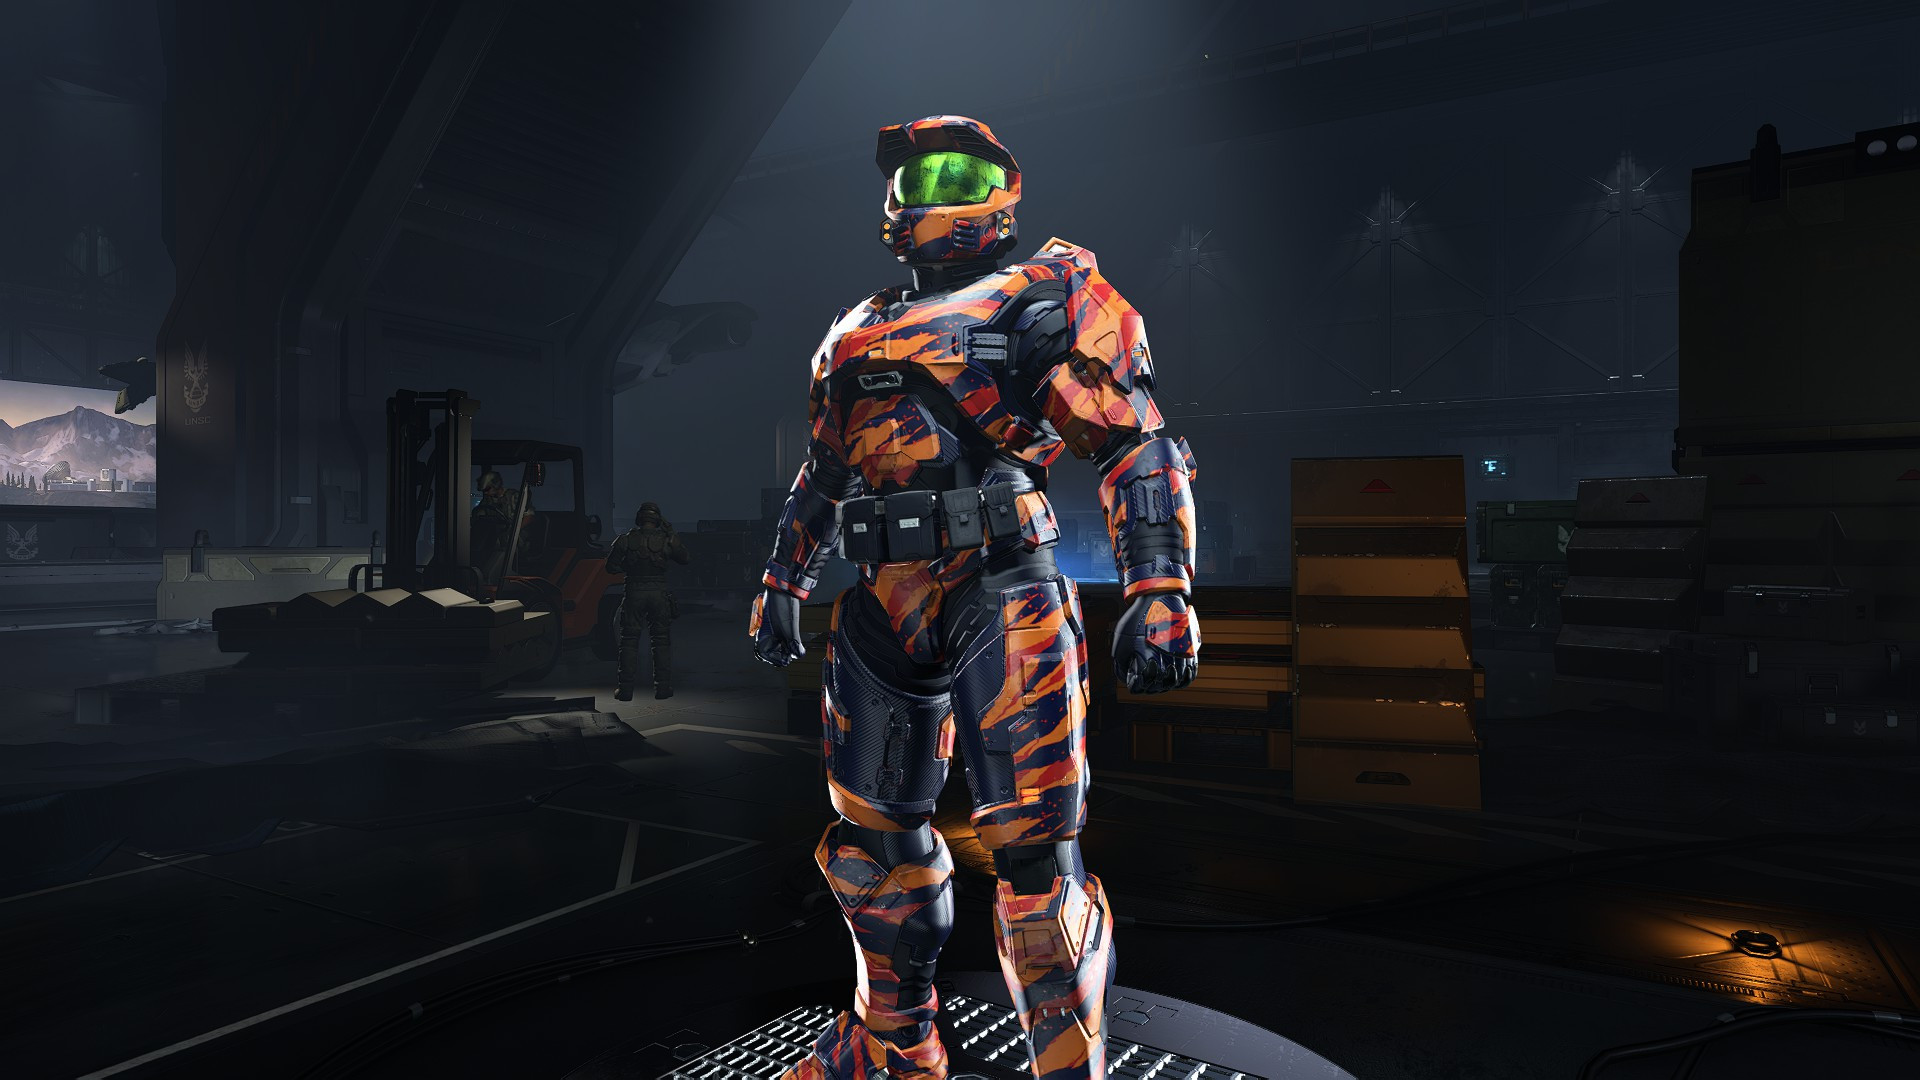 A Halo Infinite Spartan, standing resplendent in armor bedecked in Game Fuel tiger striping, his helmet visor in radiant Dew emerald. An icon, beautiful and terrible both.